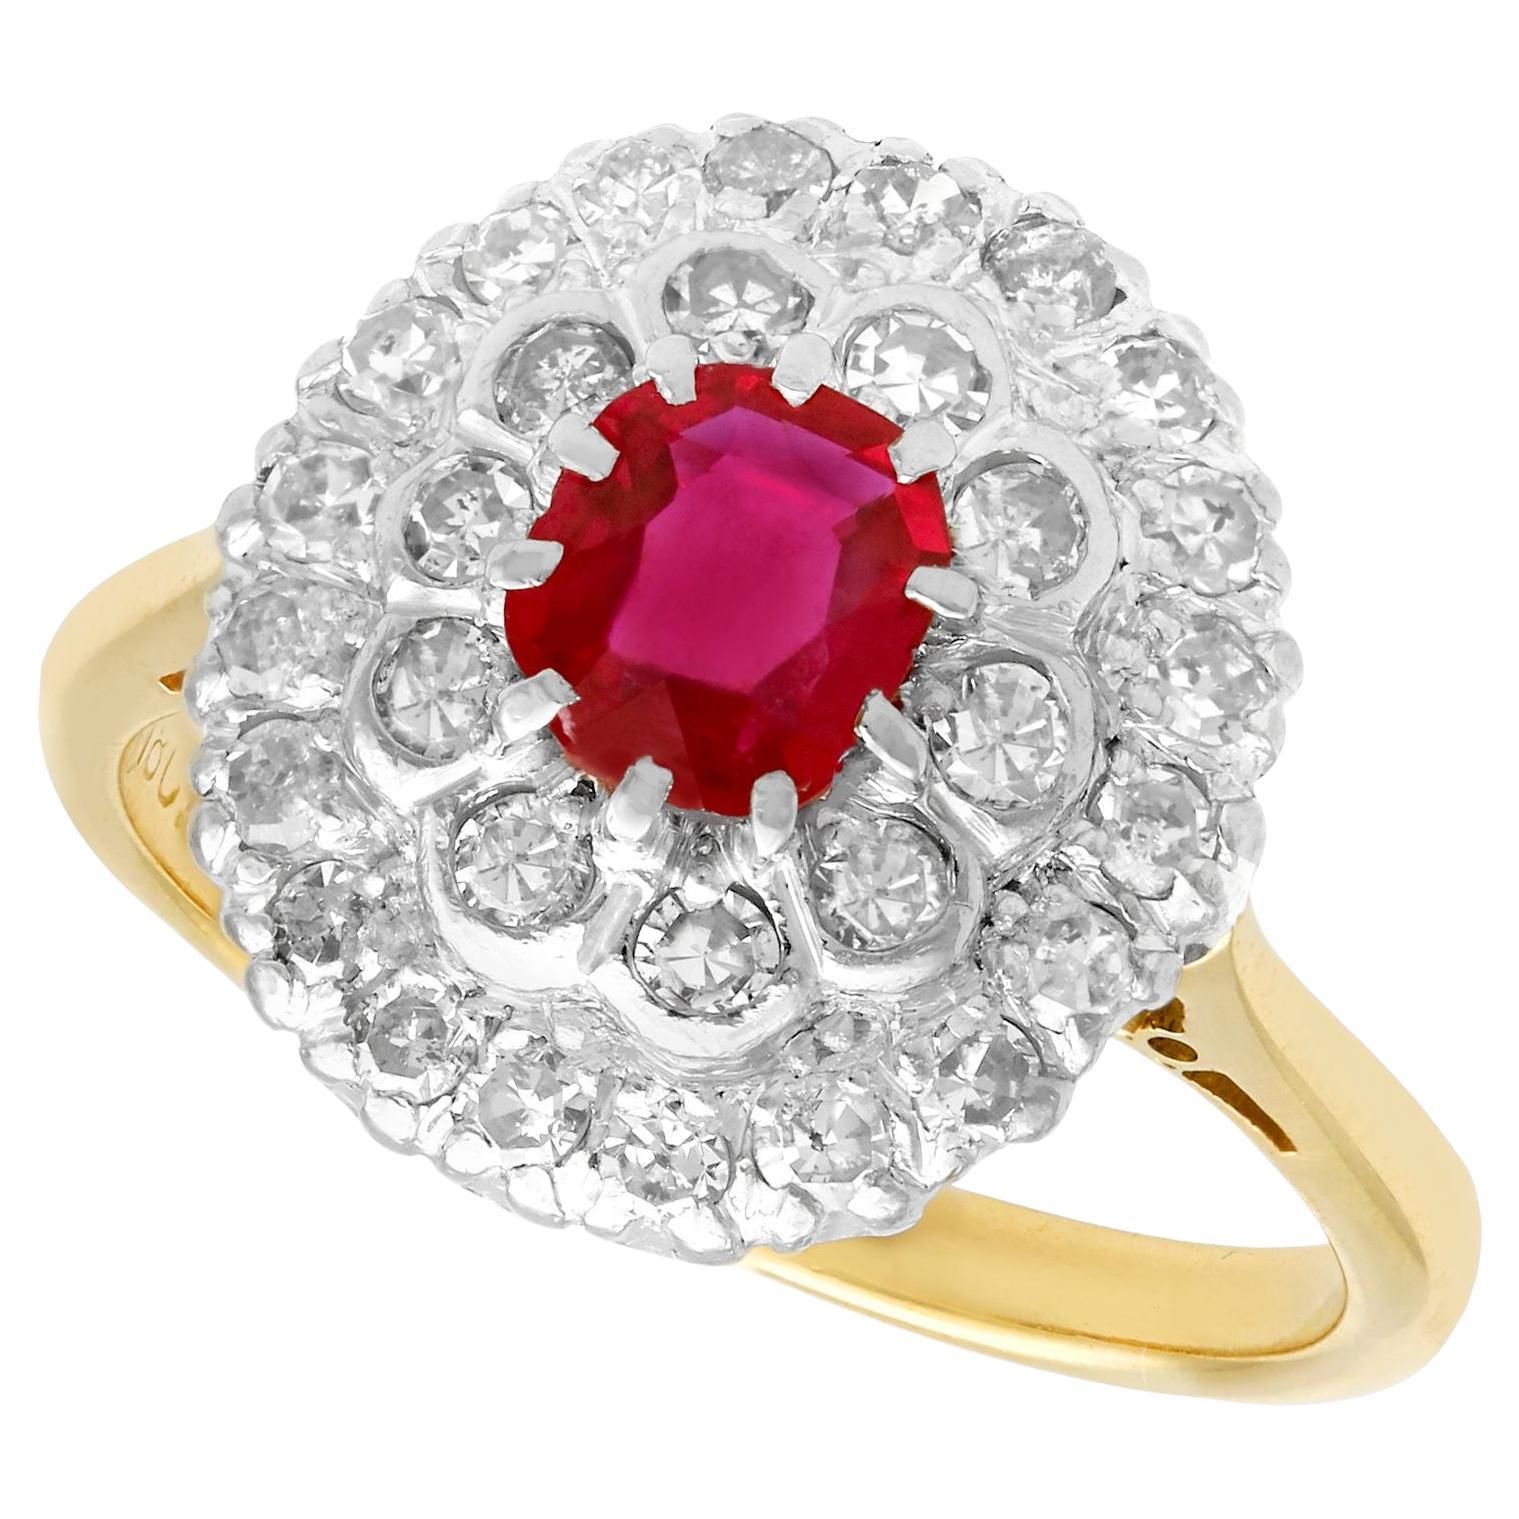 Certified 0.92 Carat Burmese Ruby and 0.51 Carat Diamond Cluster Ring For Sale